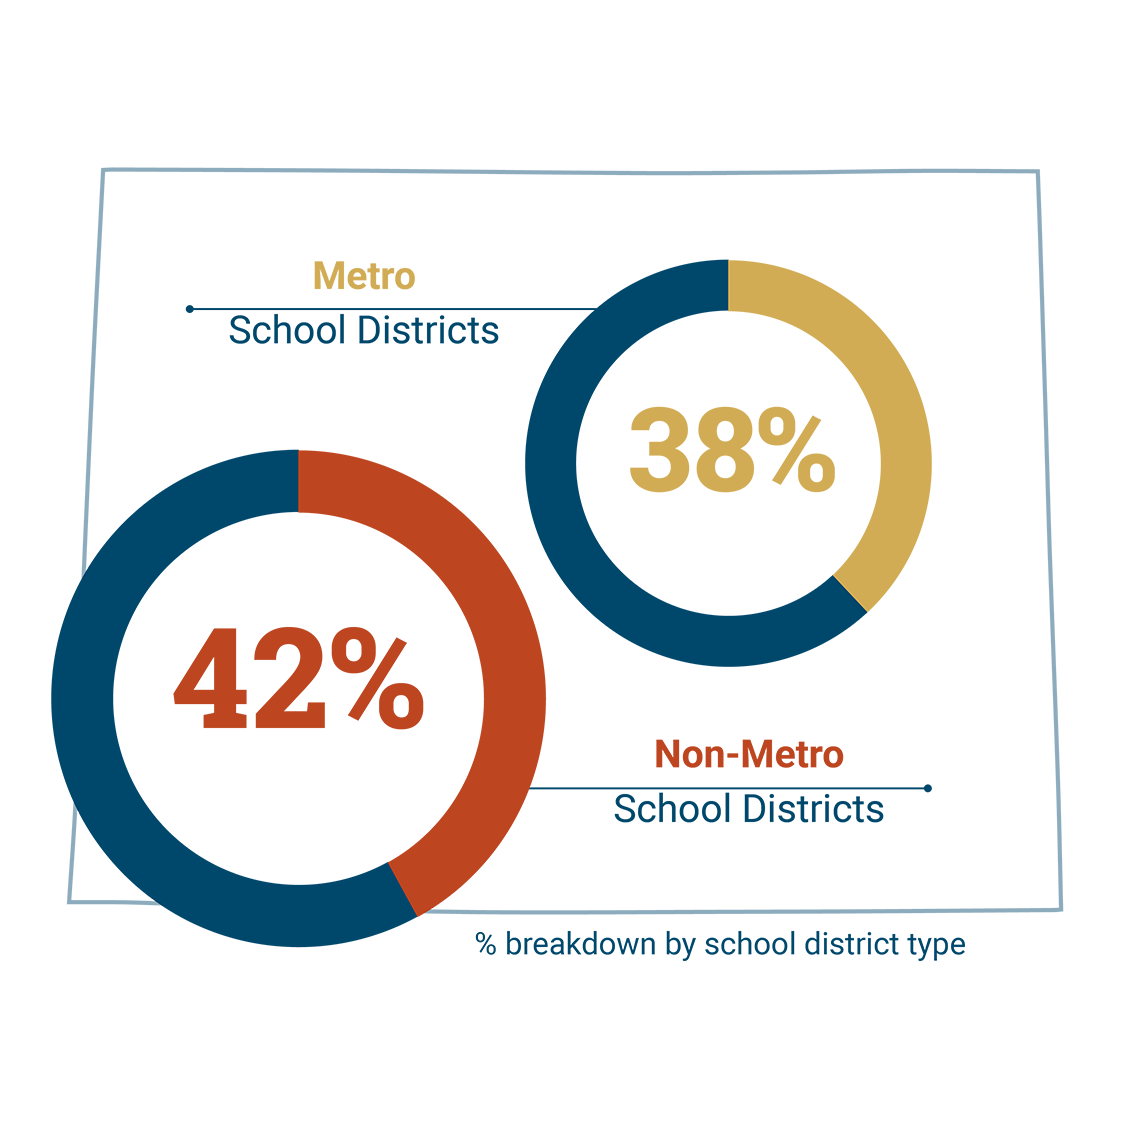 38% of educators in metro area school districts and 42% in non-metro area school districts are considering leaving the education profession.